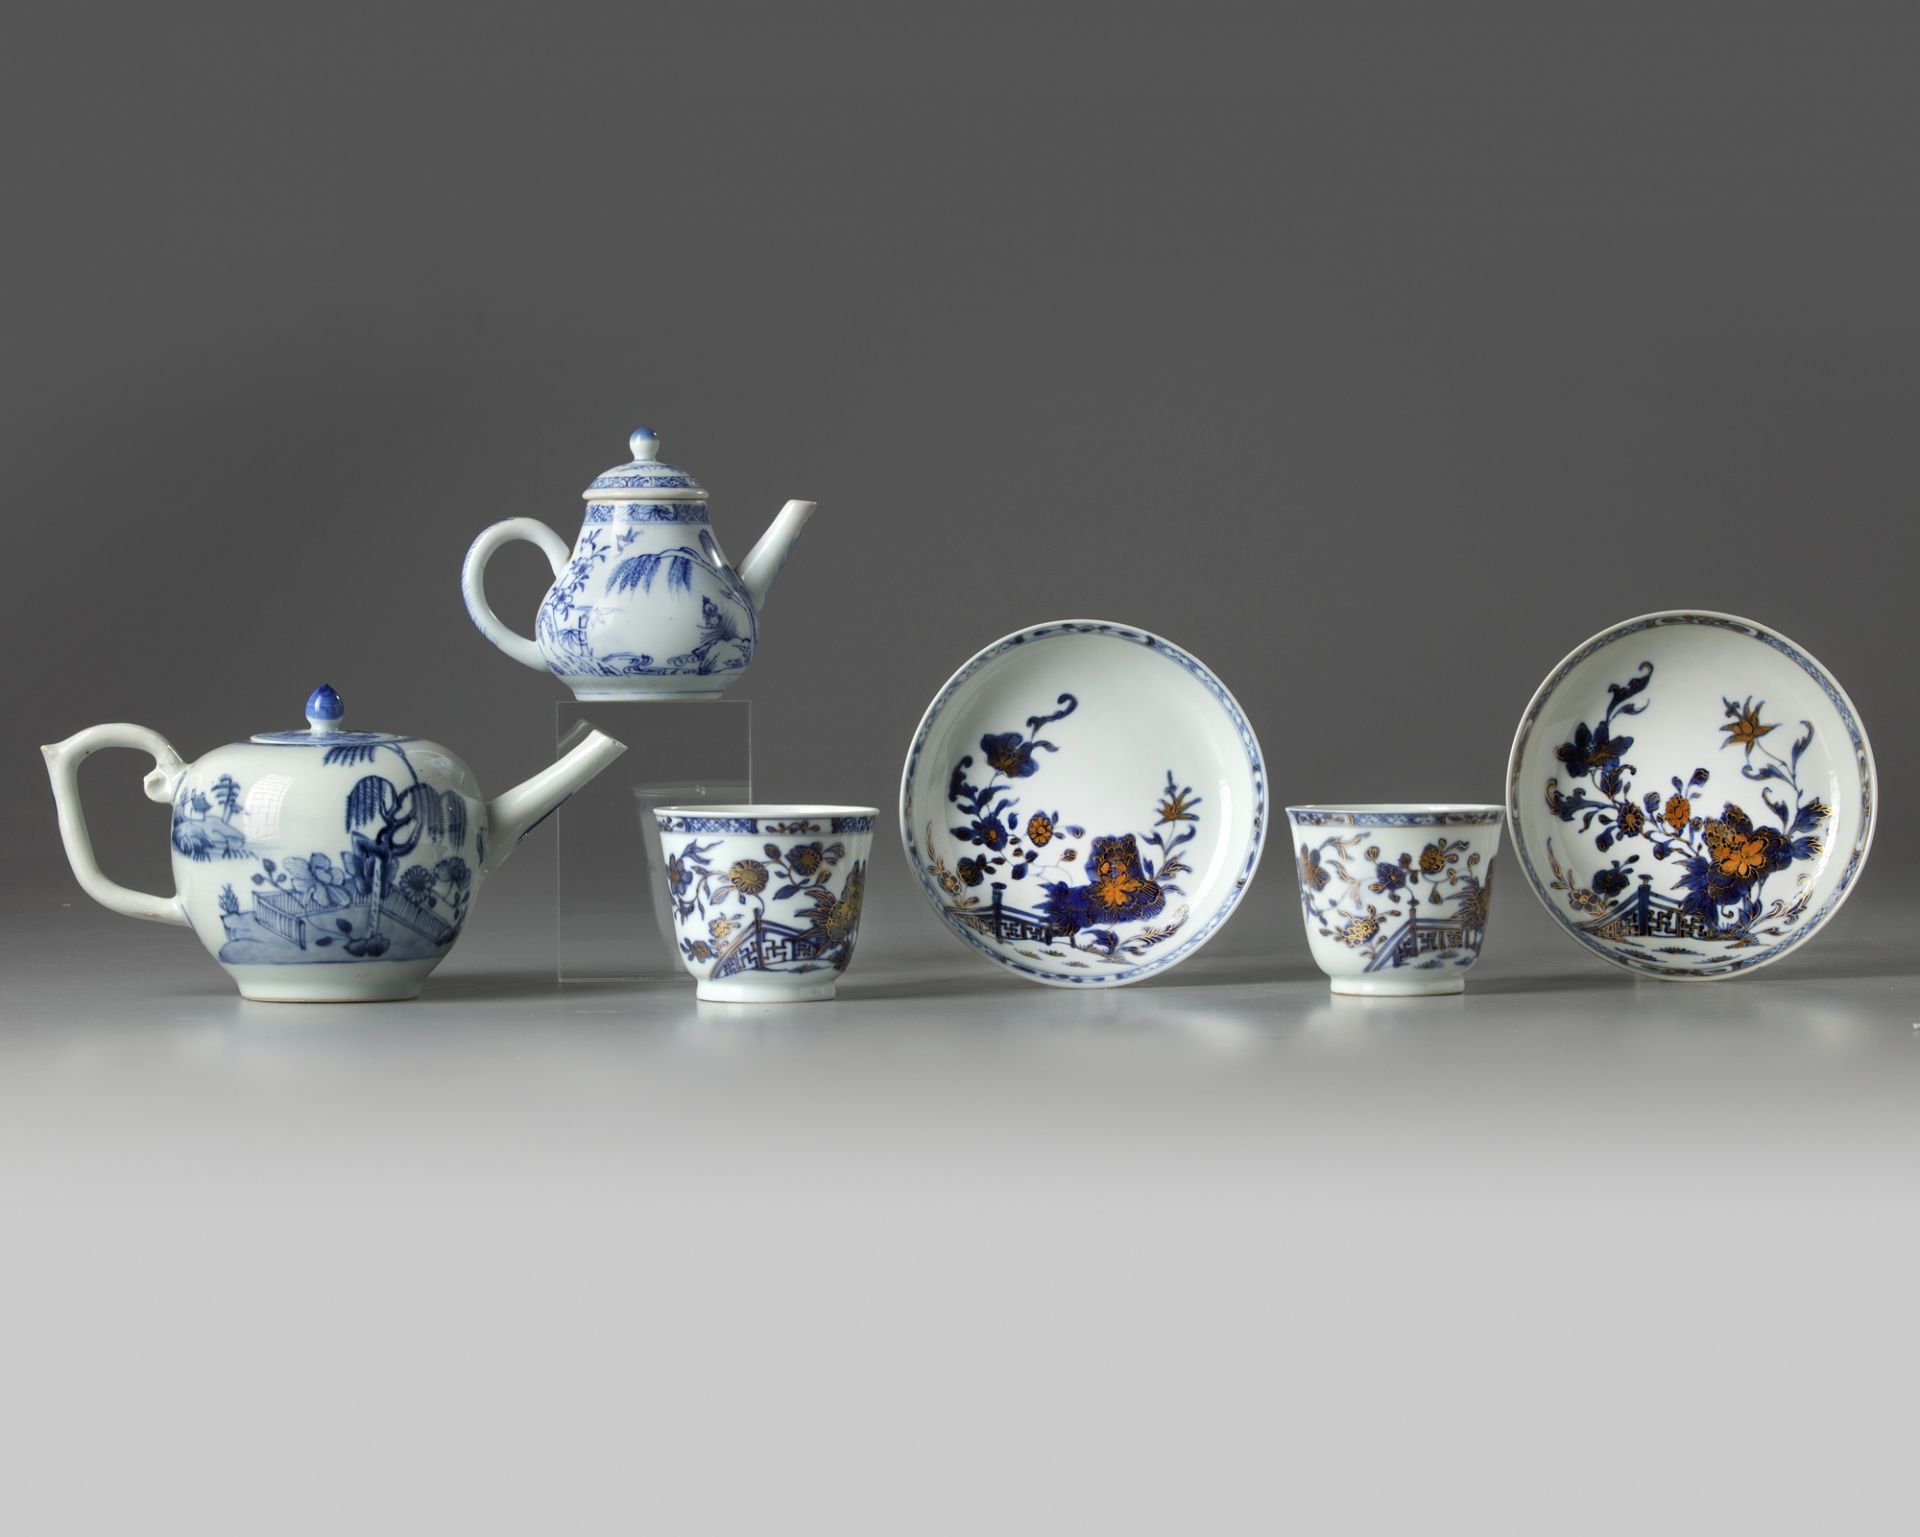 A group of Chinese blue and white teapots, cups, and saucers